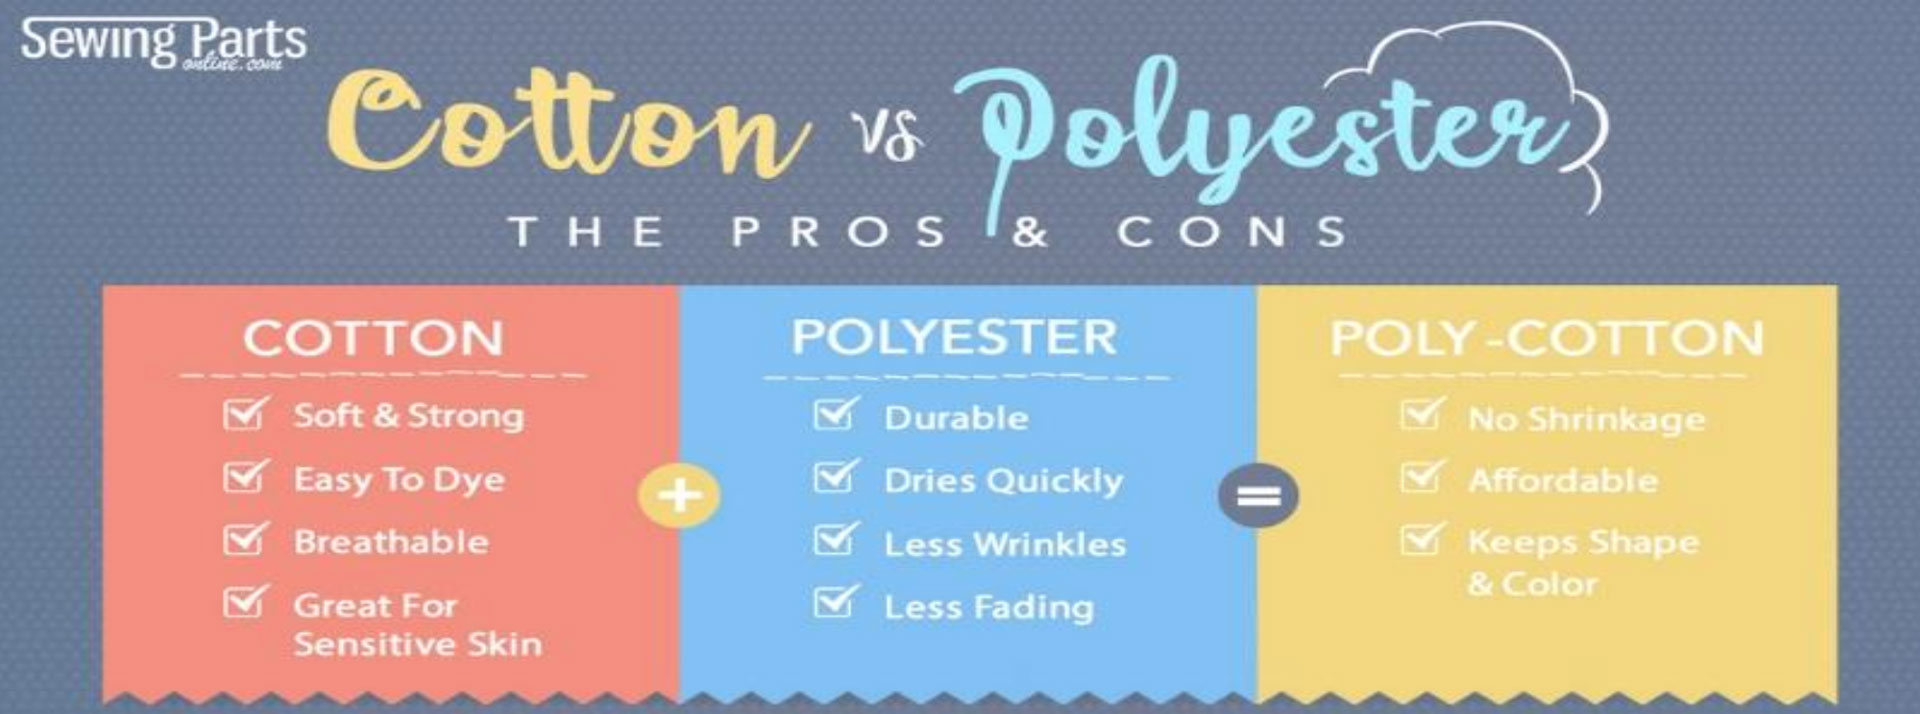 A chart revealing characteristics of cotton, polyester and poly-cotton